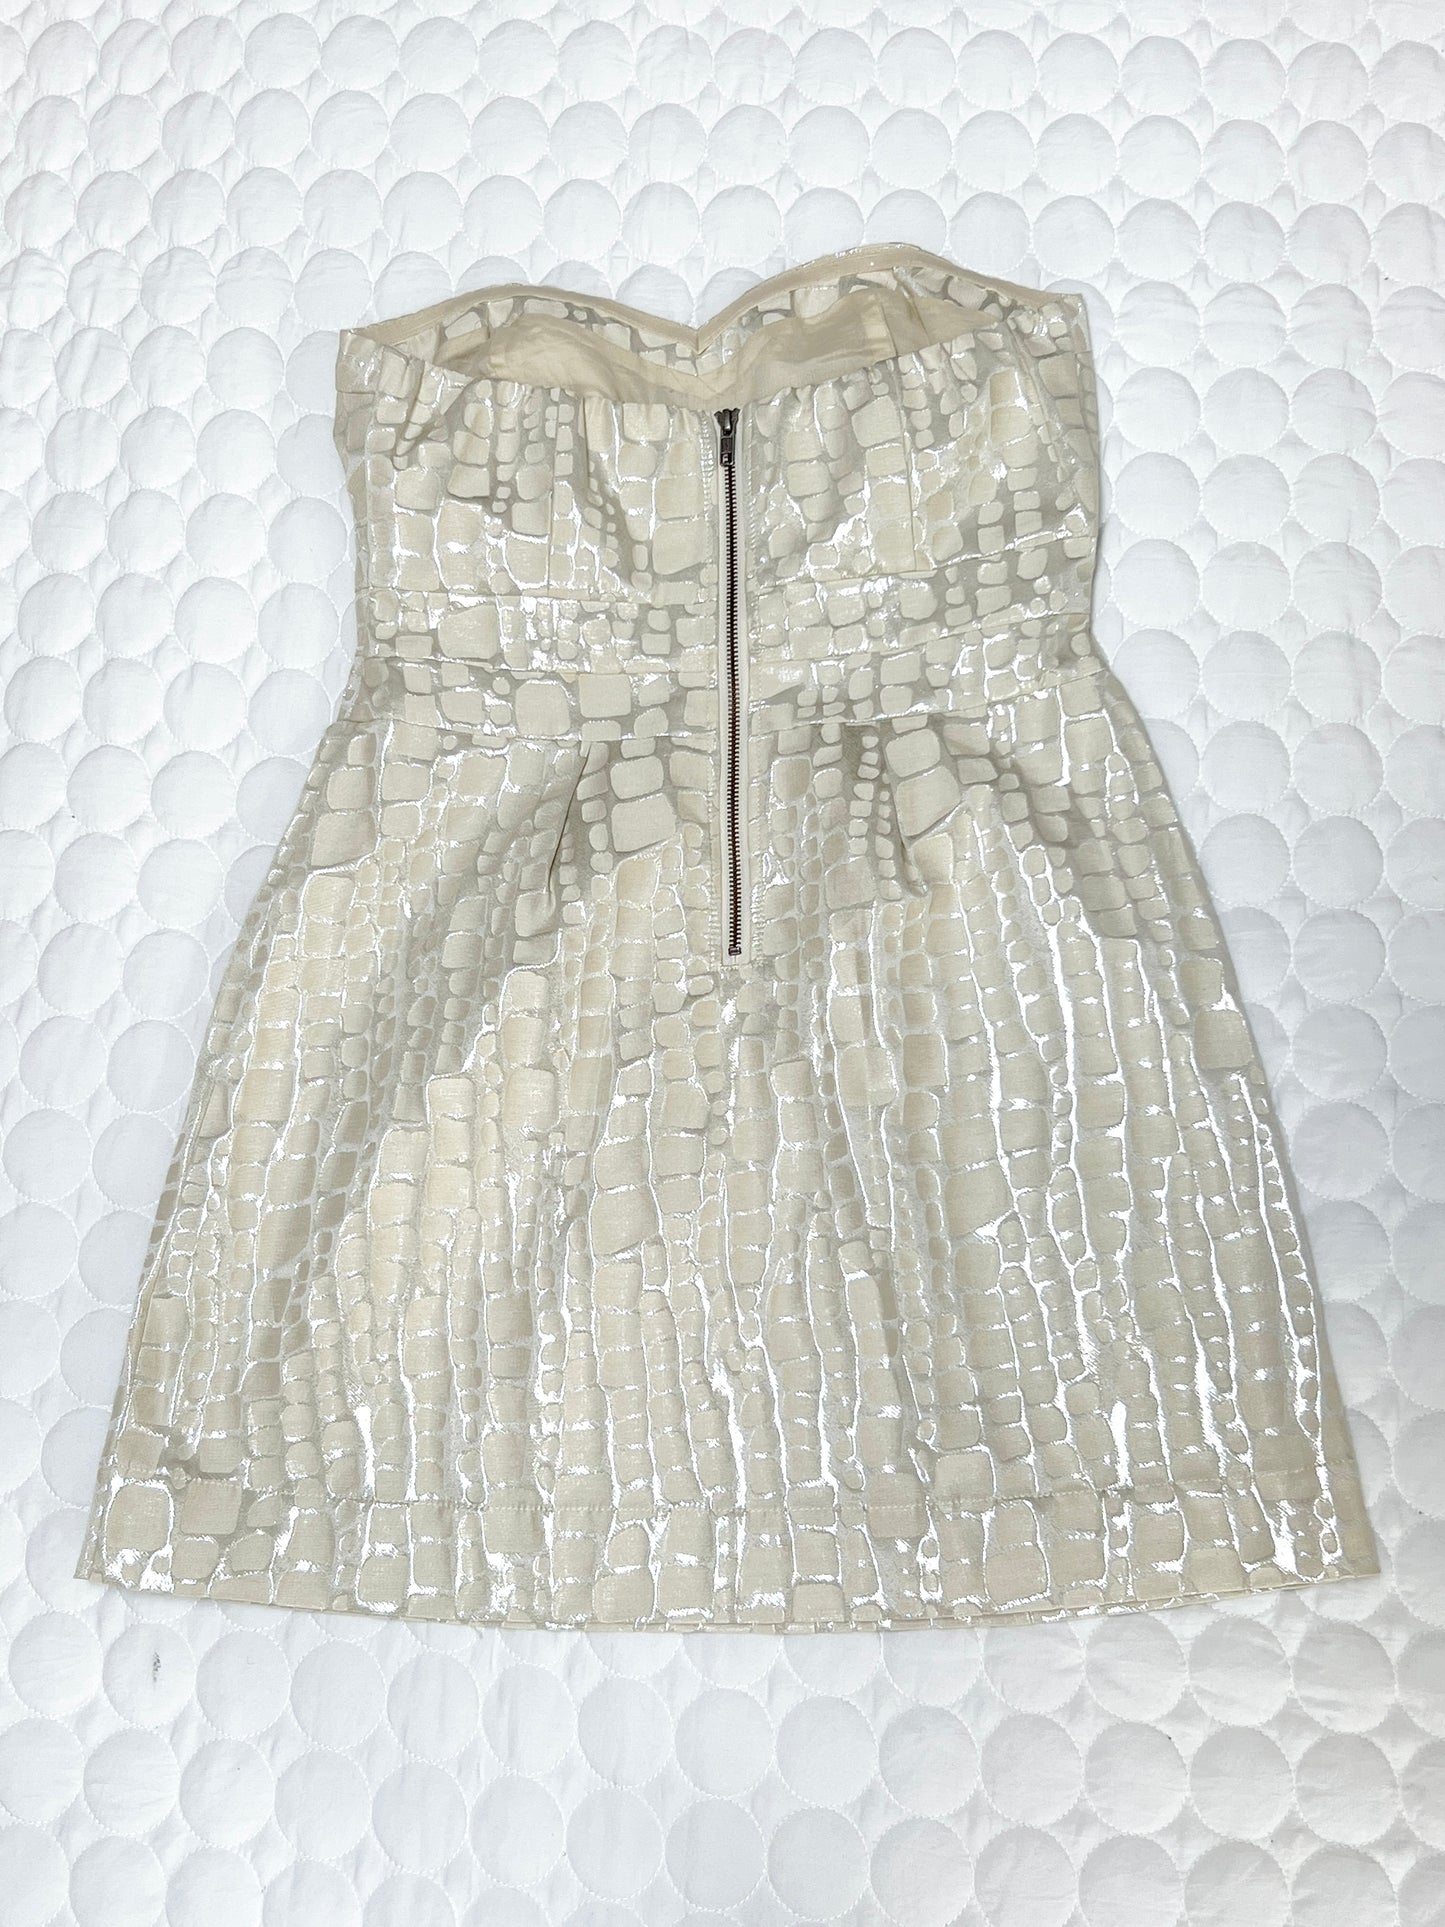 Size 12 American Eagle strapless dress, cream with silver shimmer. New without tags. Exposed zipper on back. $10